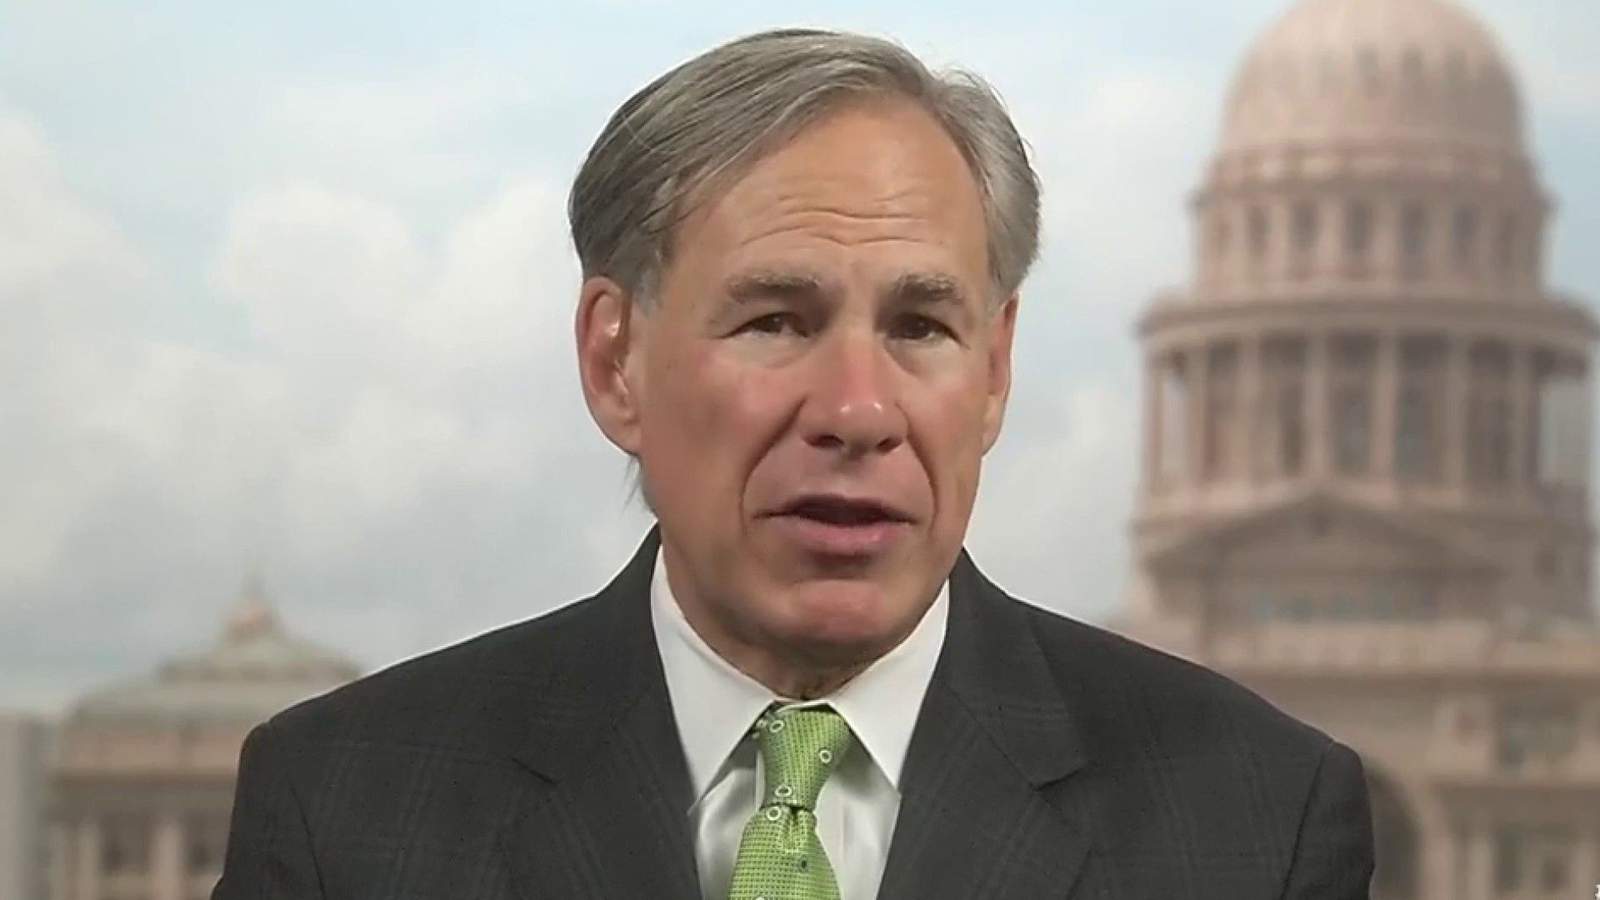 WATCH LIVE: Texas Gov. Greg Abbott to sign pledge against police budget cuts